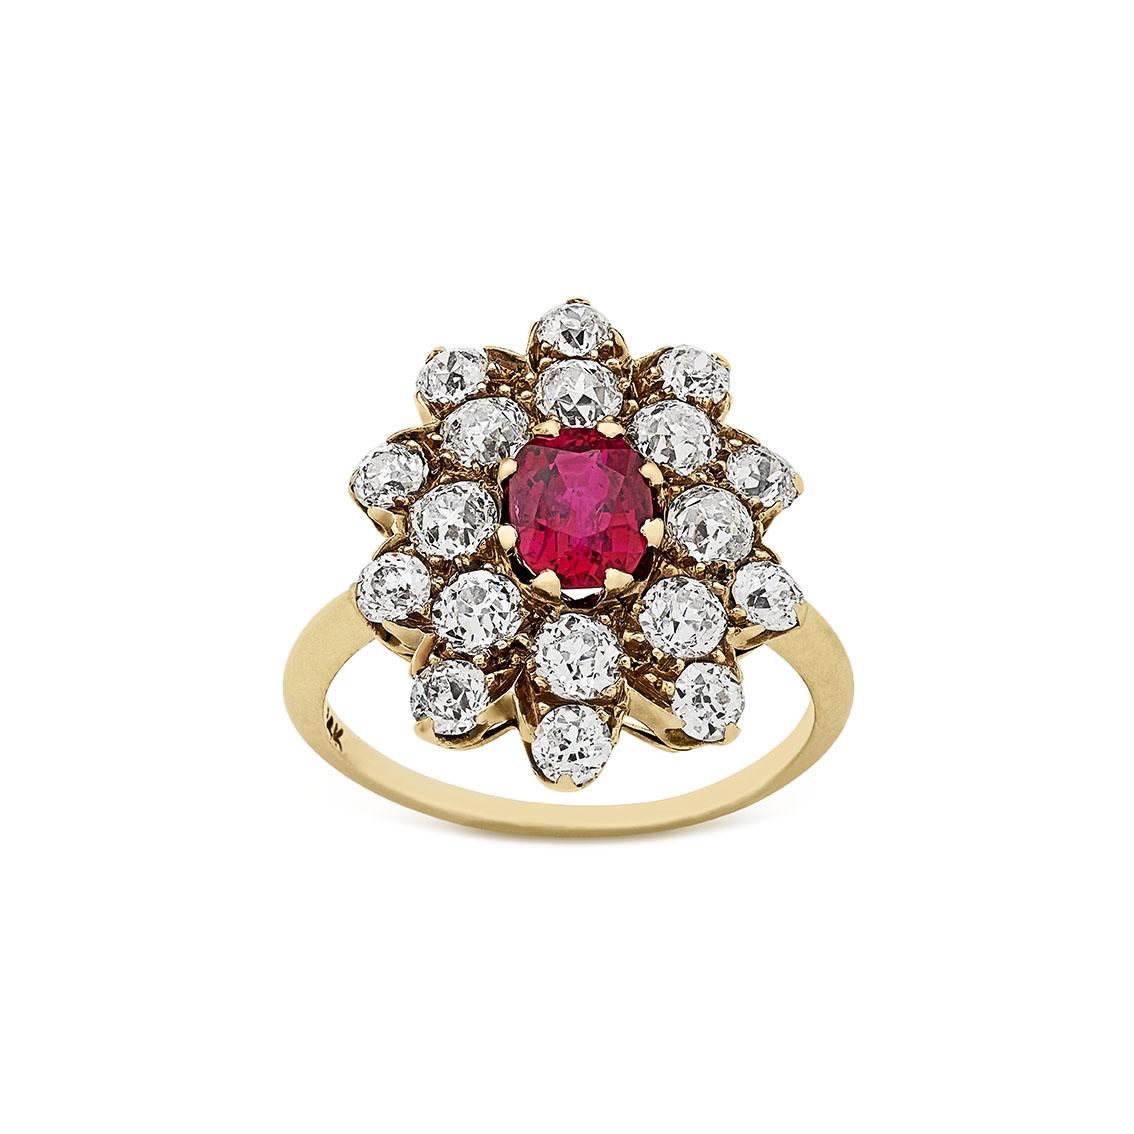 Natural Burma ruby and diamond cluster ring